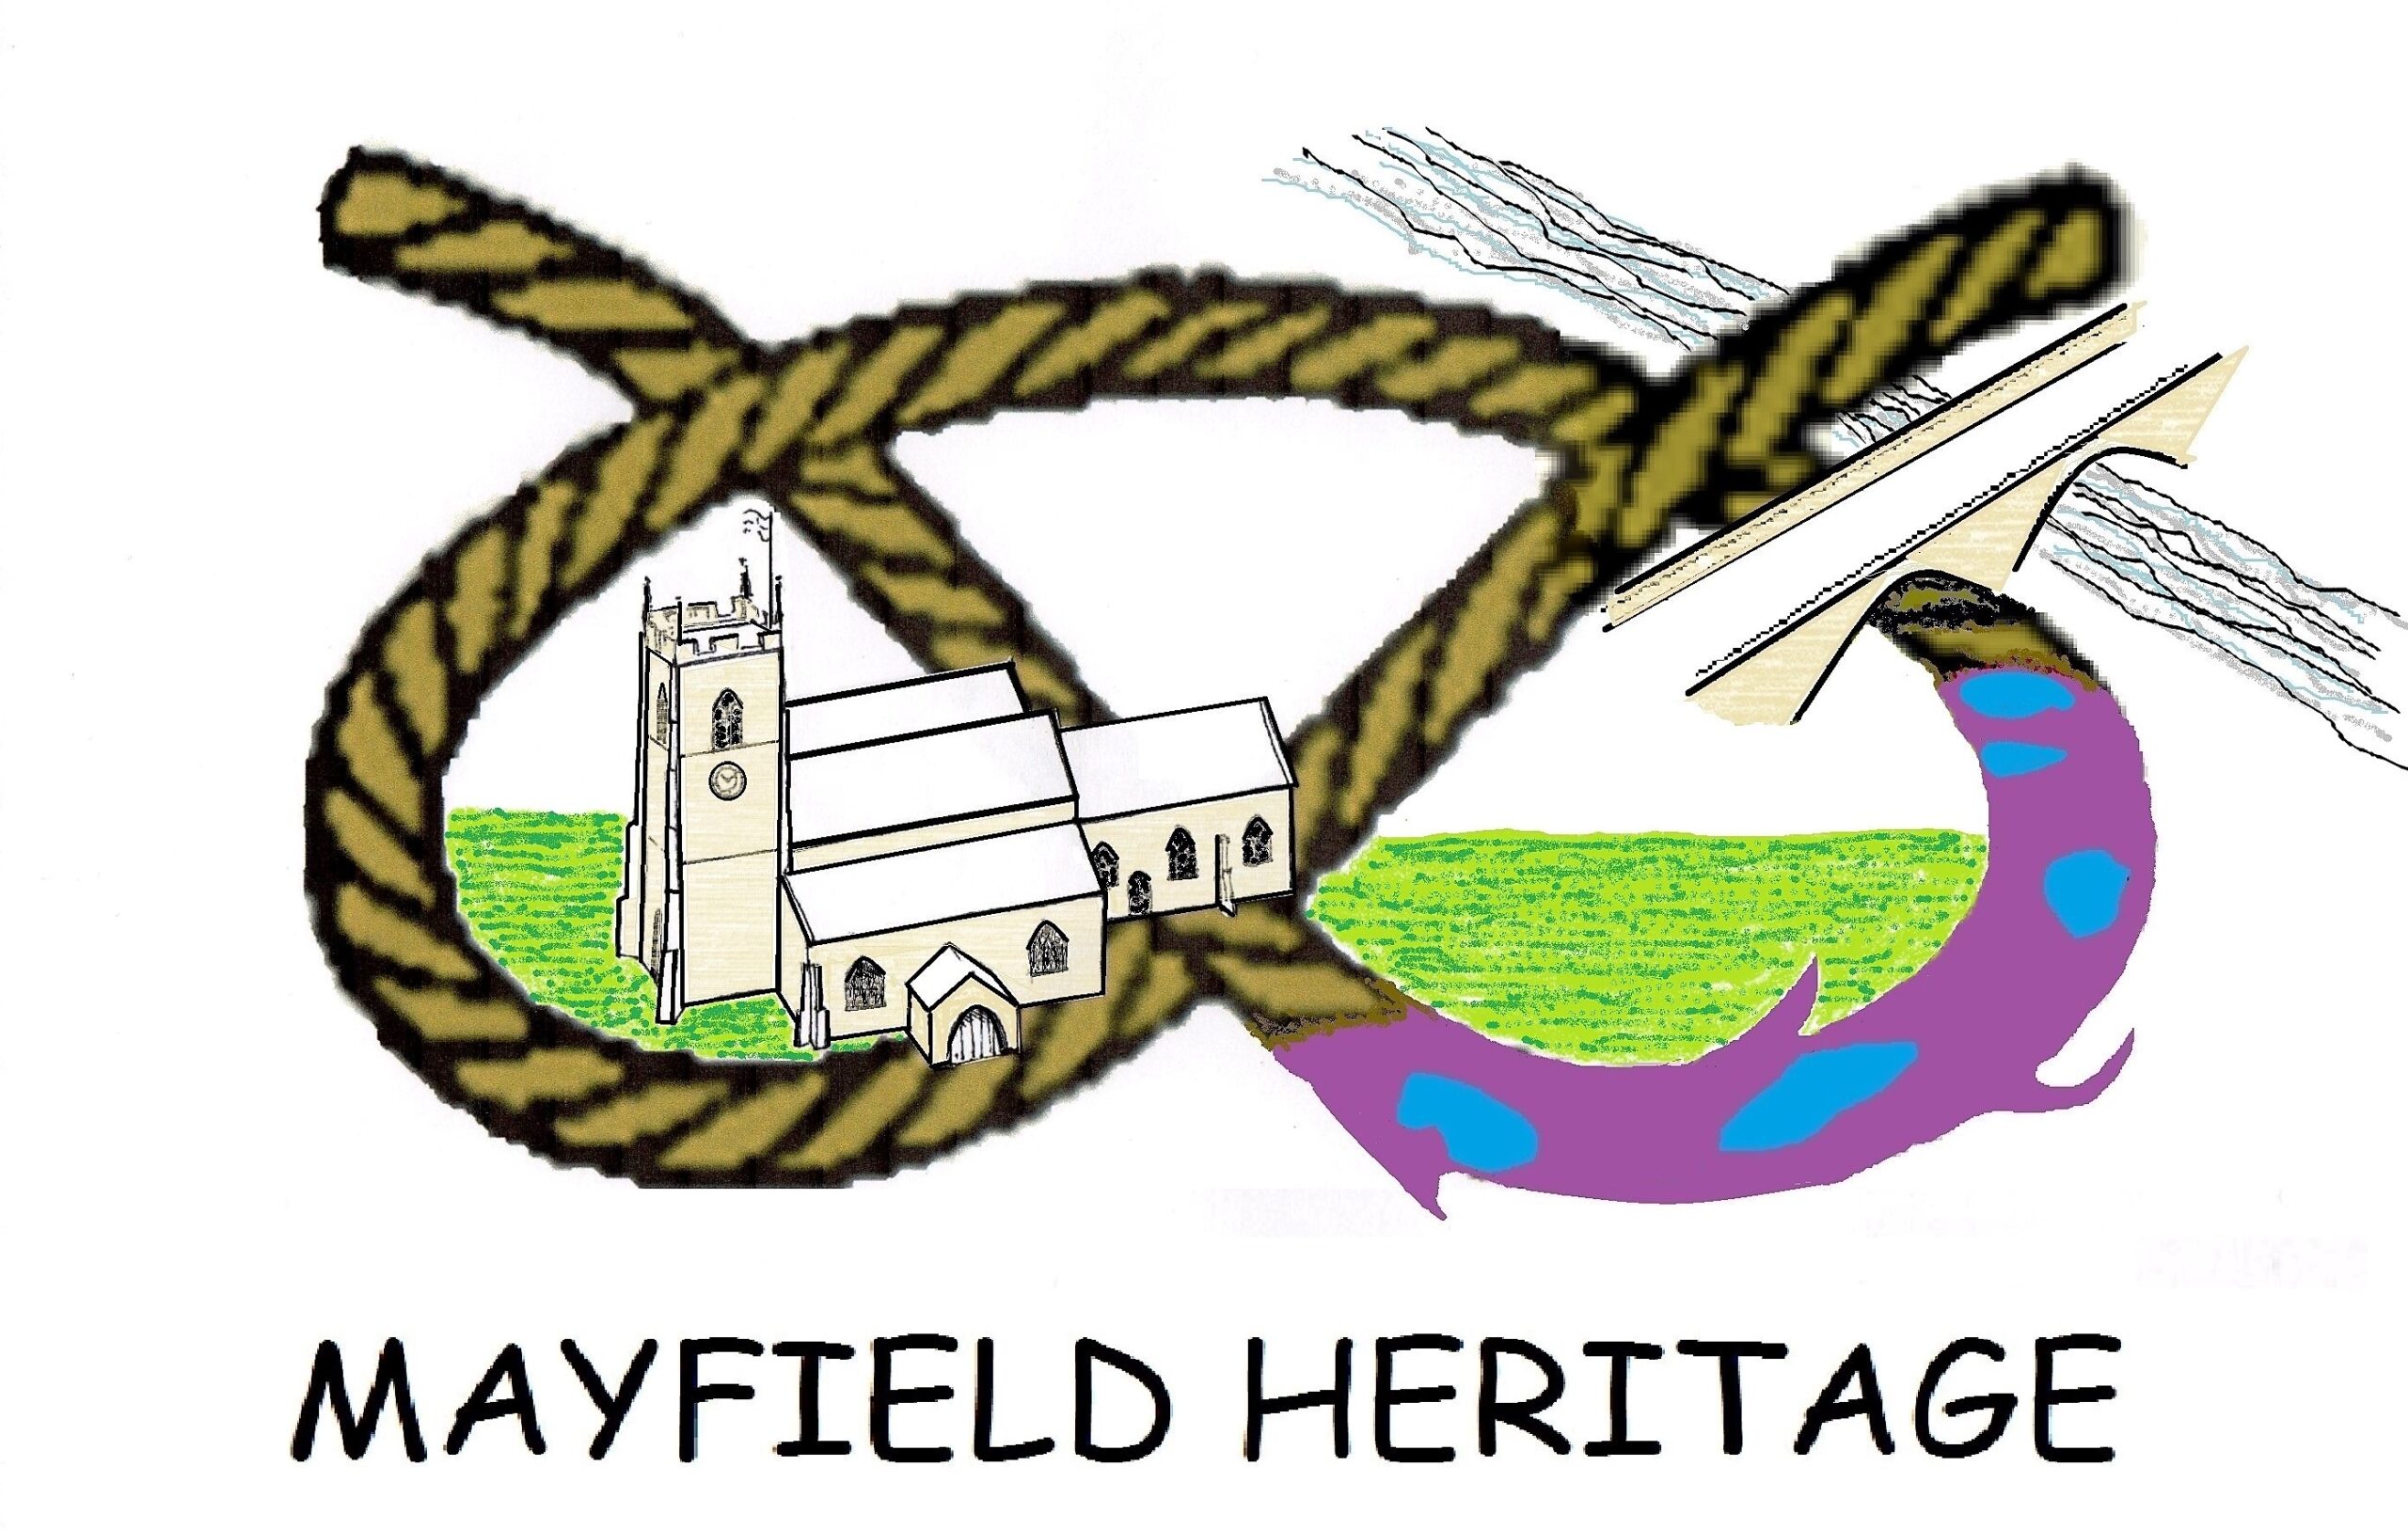 The Mayfield Heritage Group